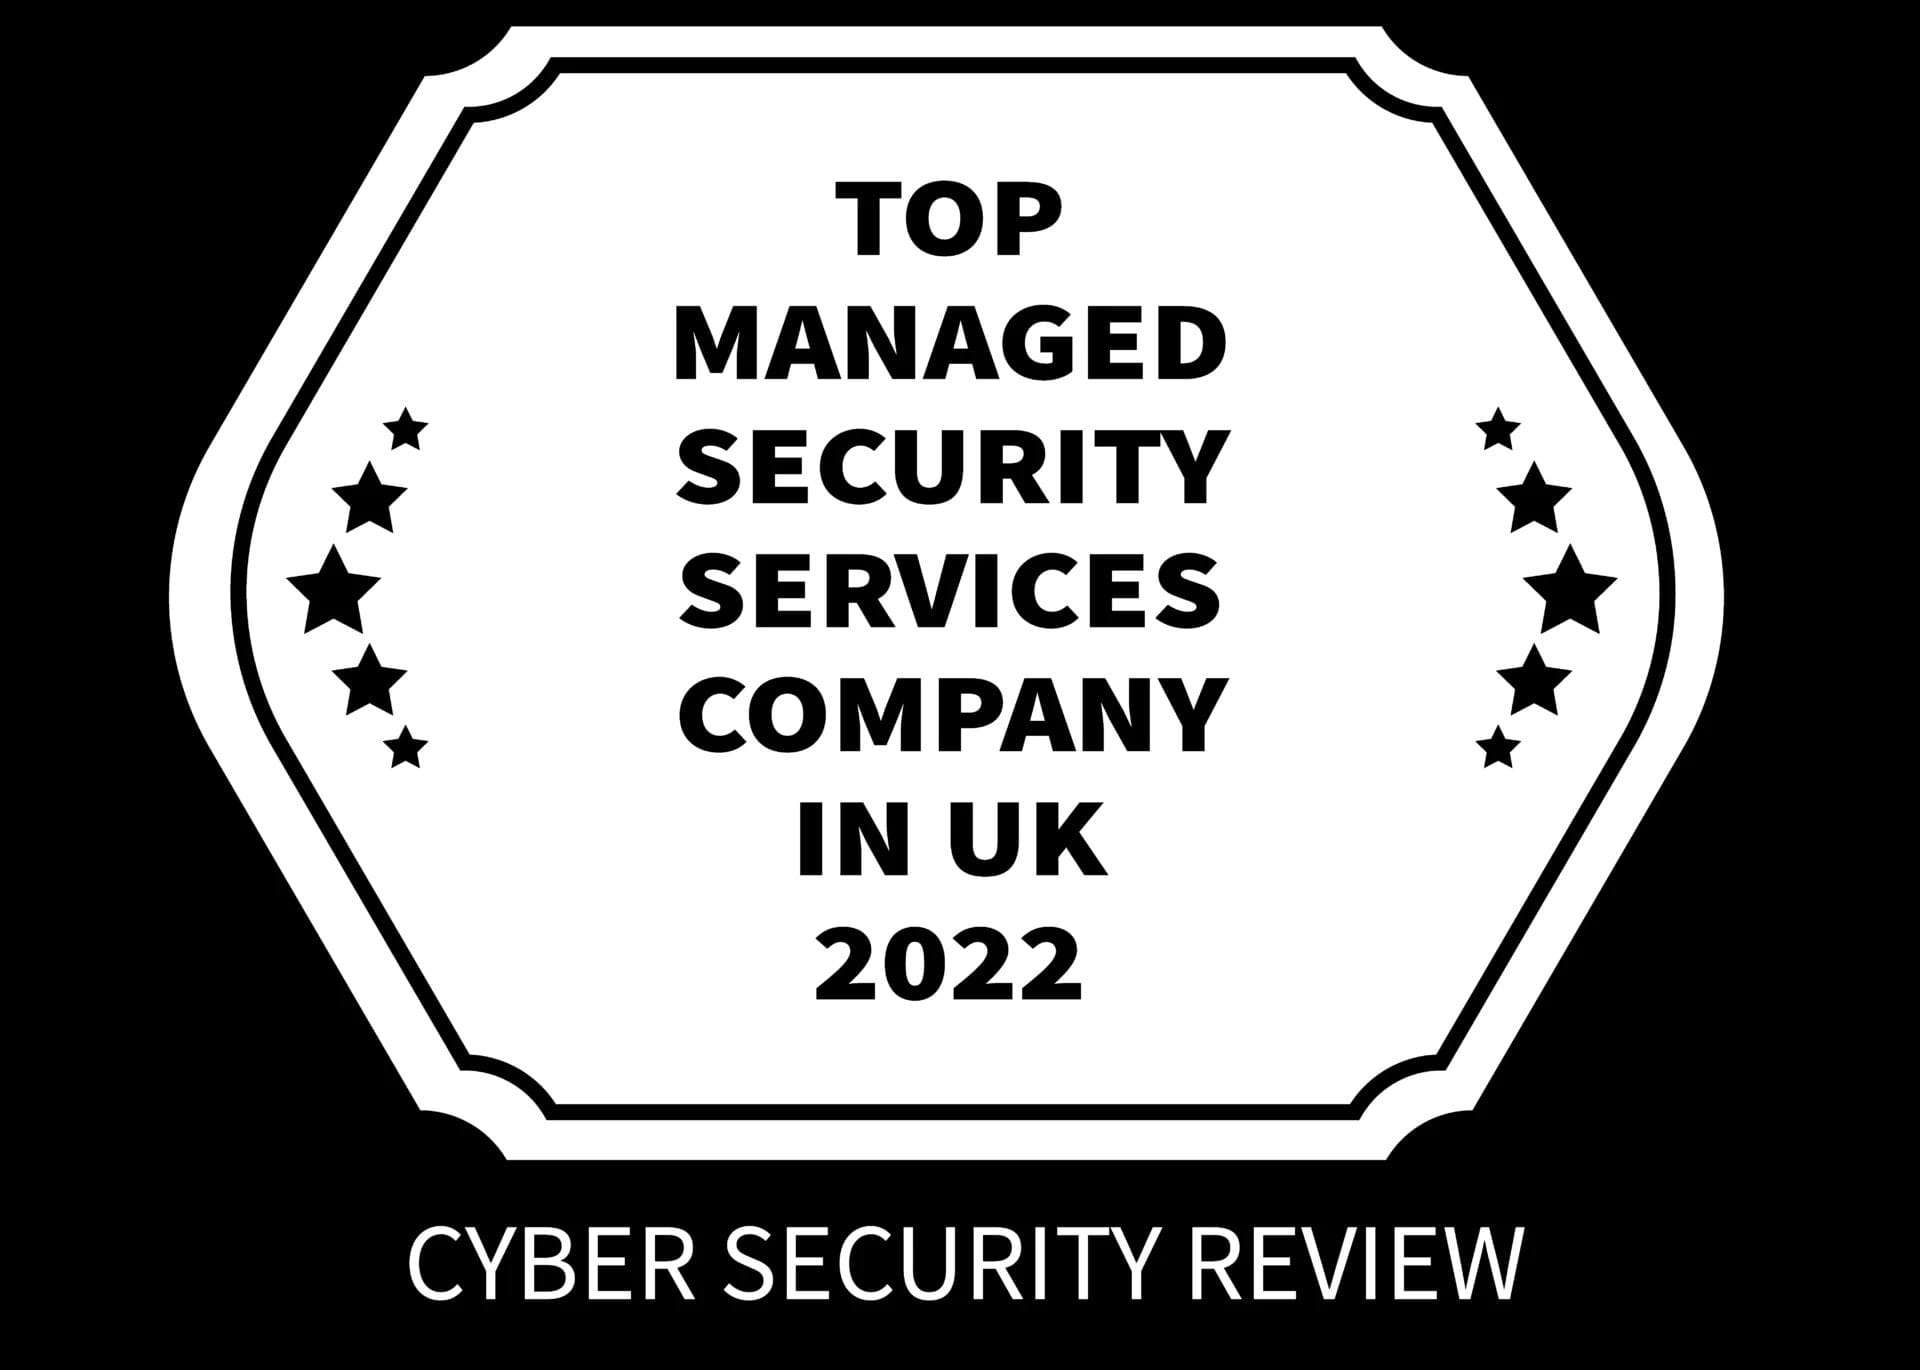 Top Managed Security Service Company in the UK Award